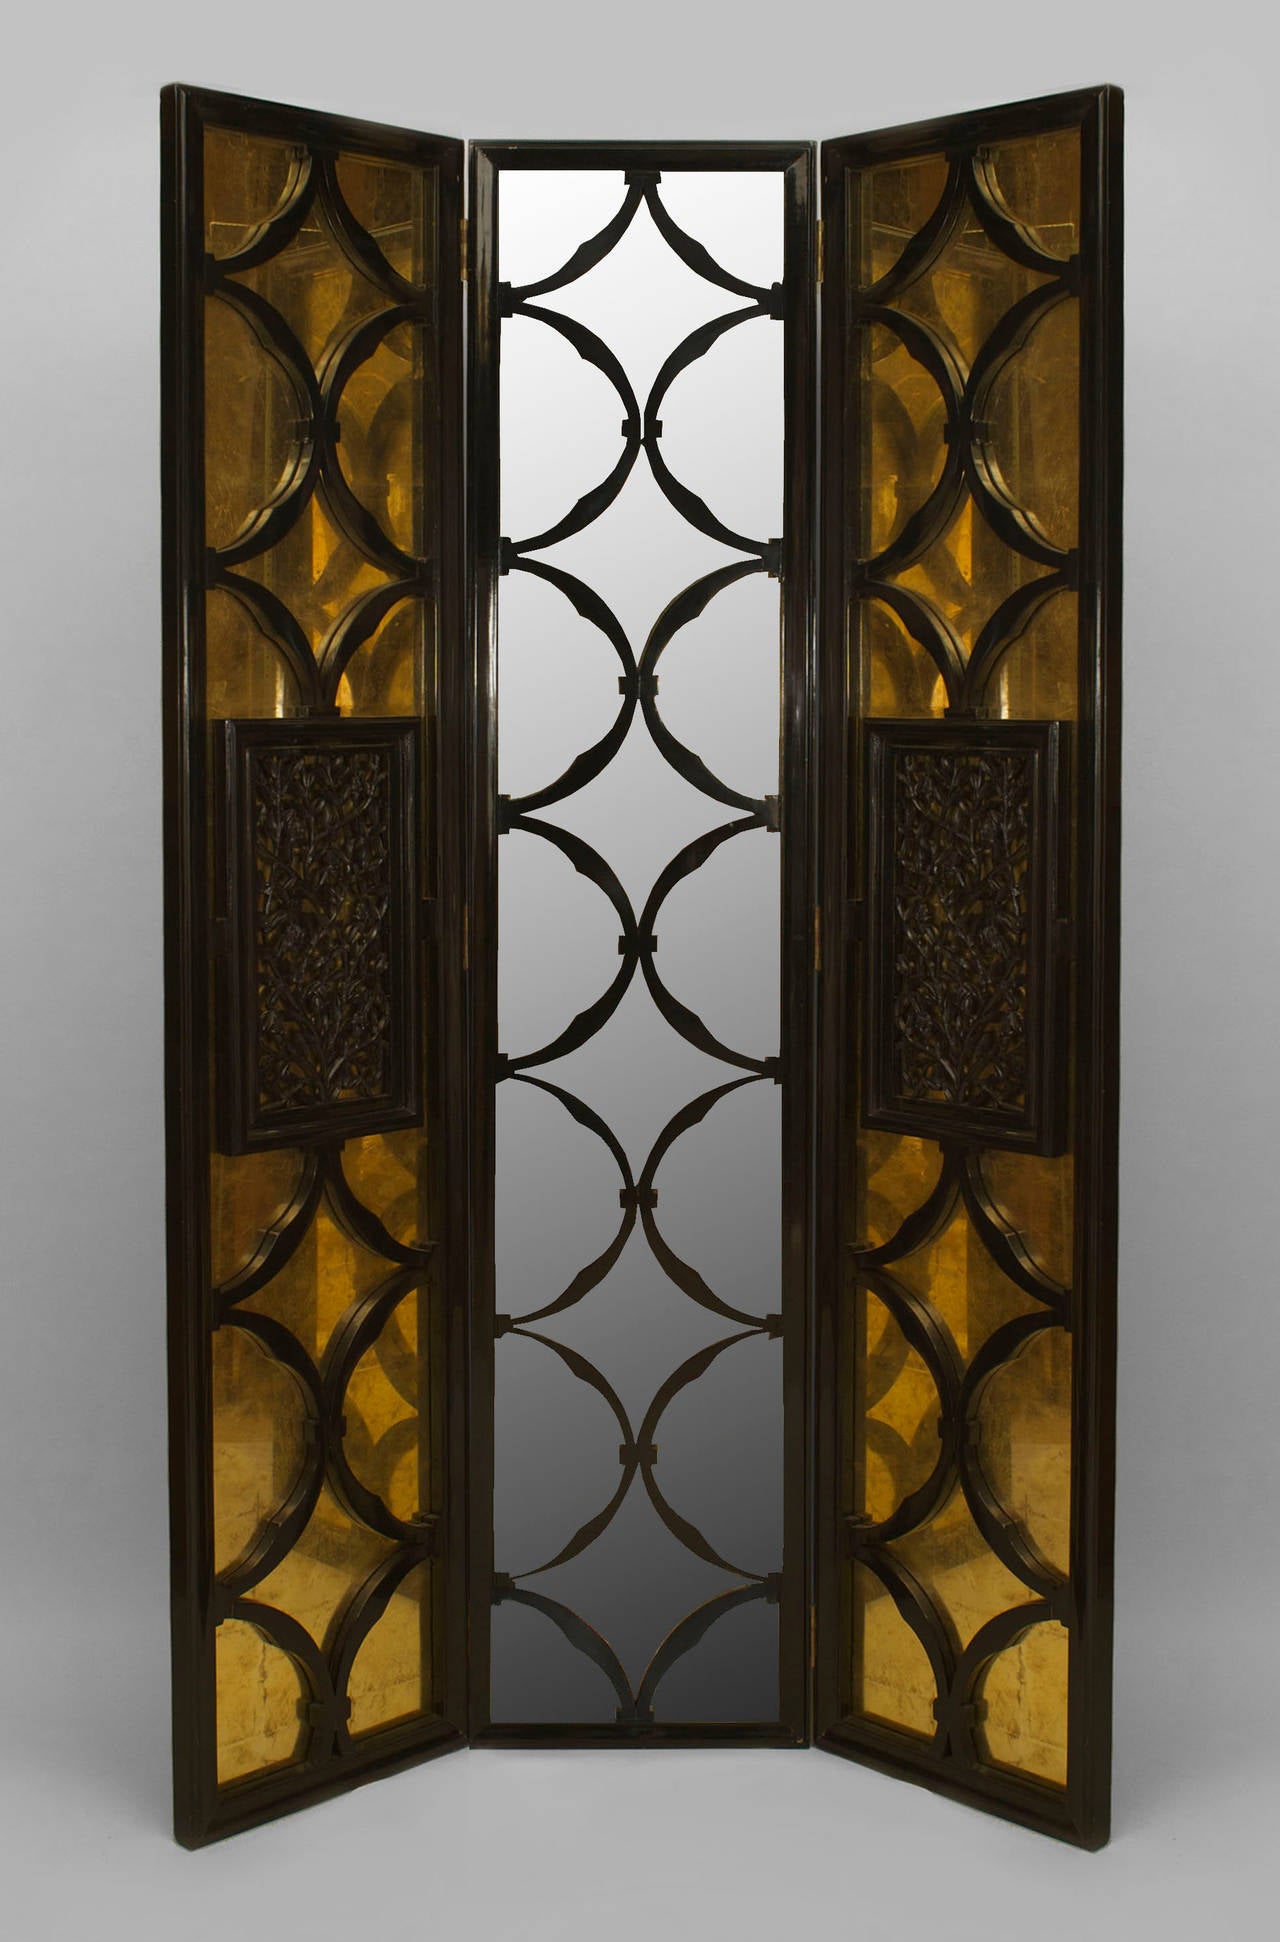 French post-war design black lacquer and parcel-gilt mirrored three panel screen with two filigree carved center panels and half circle design (Maison Jansen 1970s).